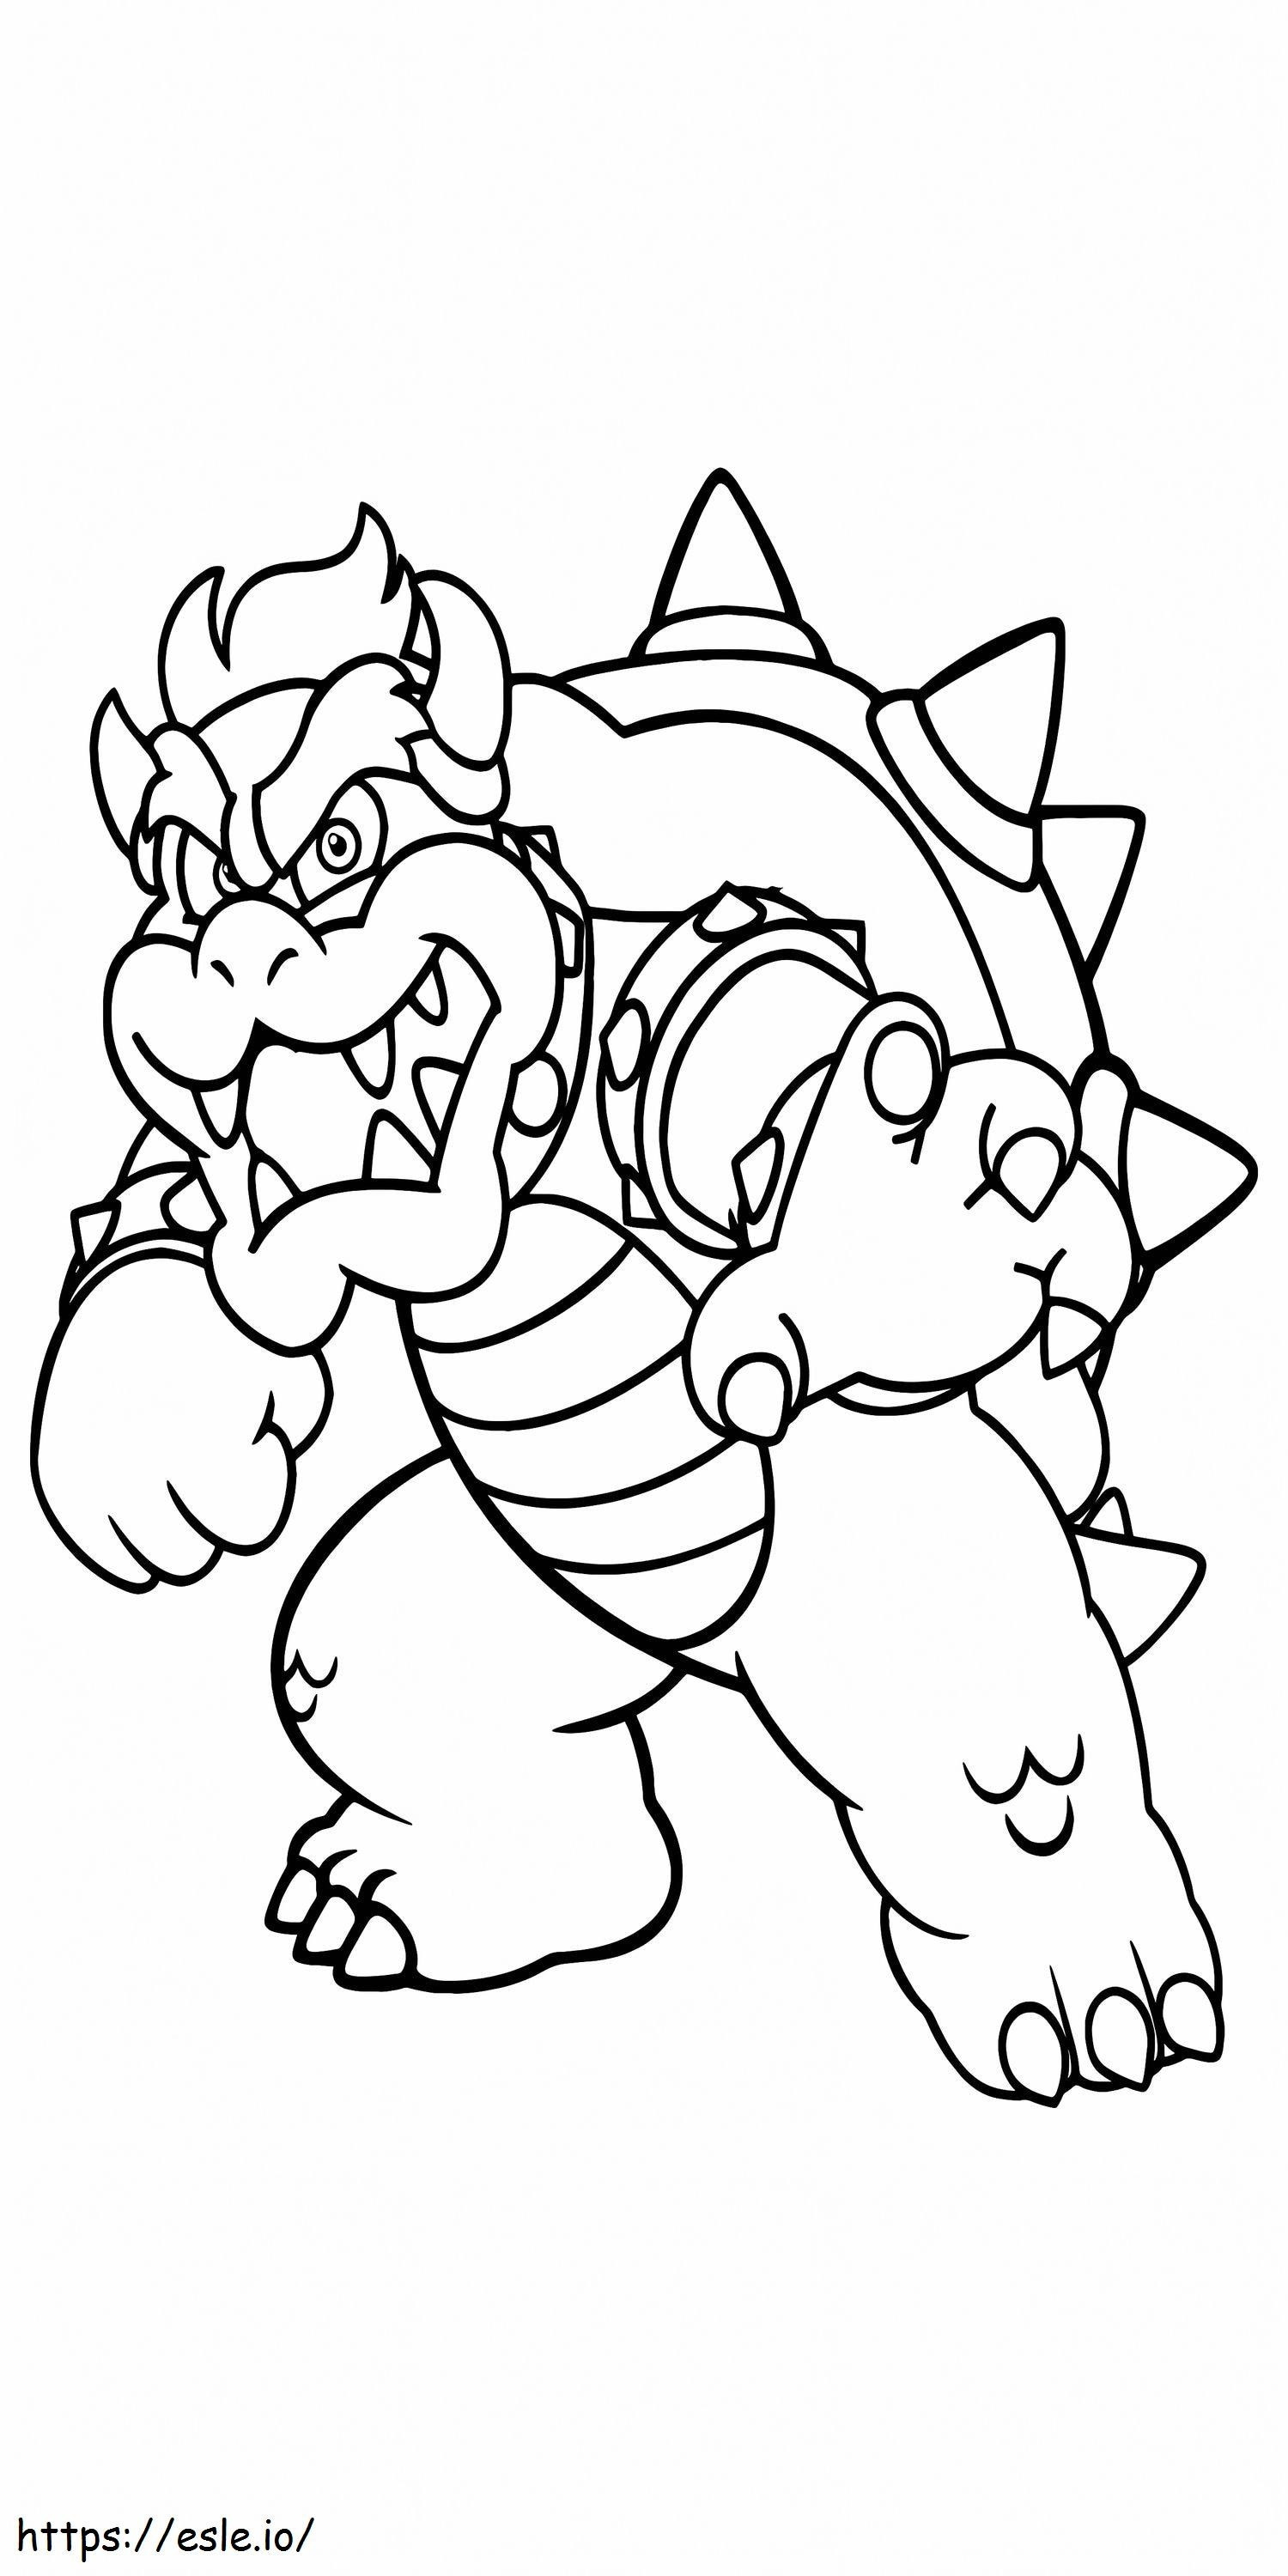 Baby Bowser Printable 15 coloring page